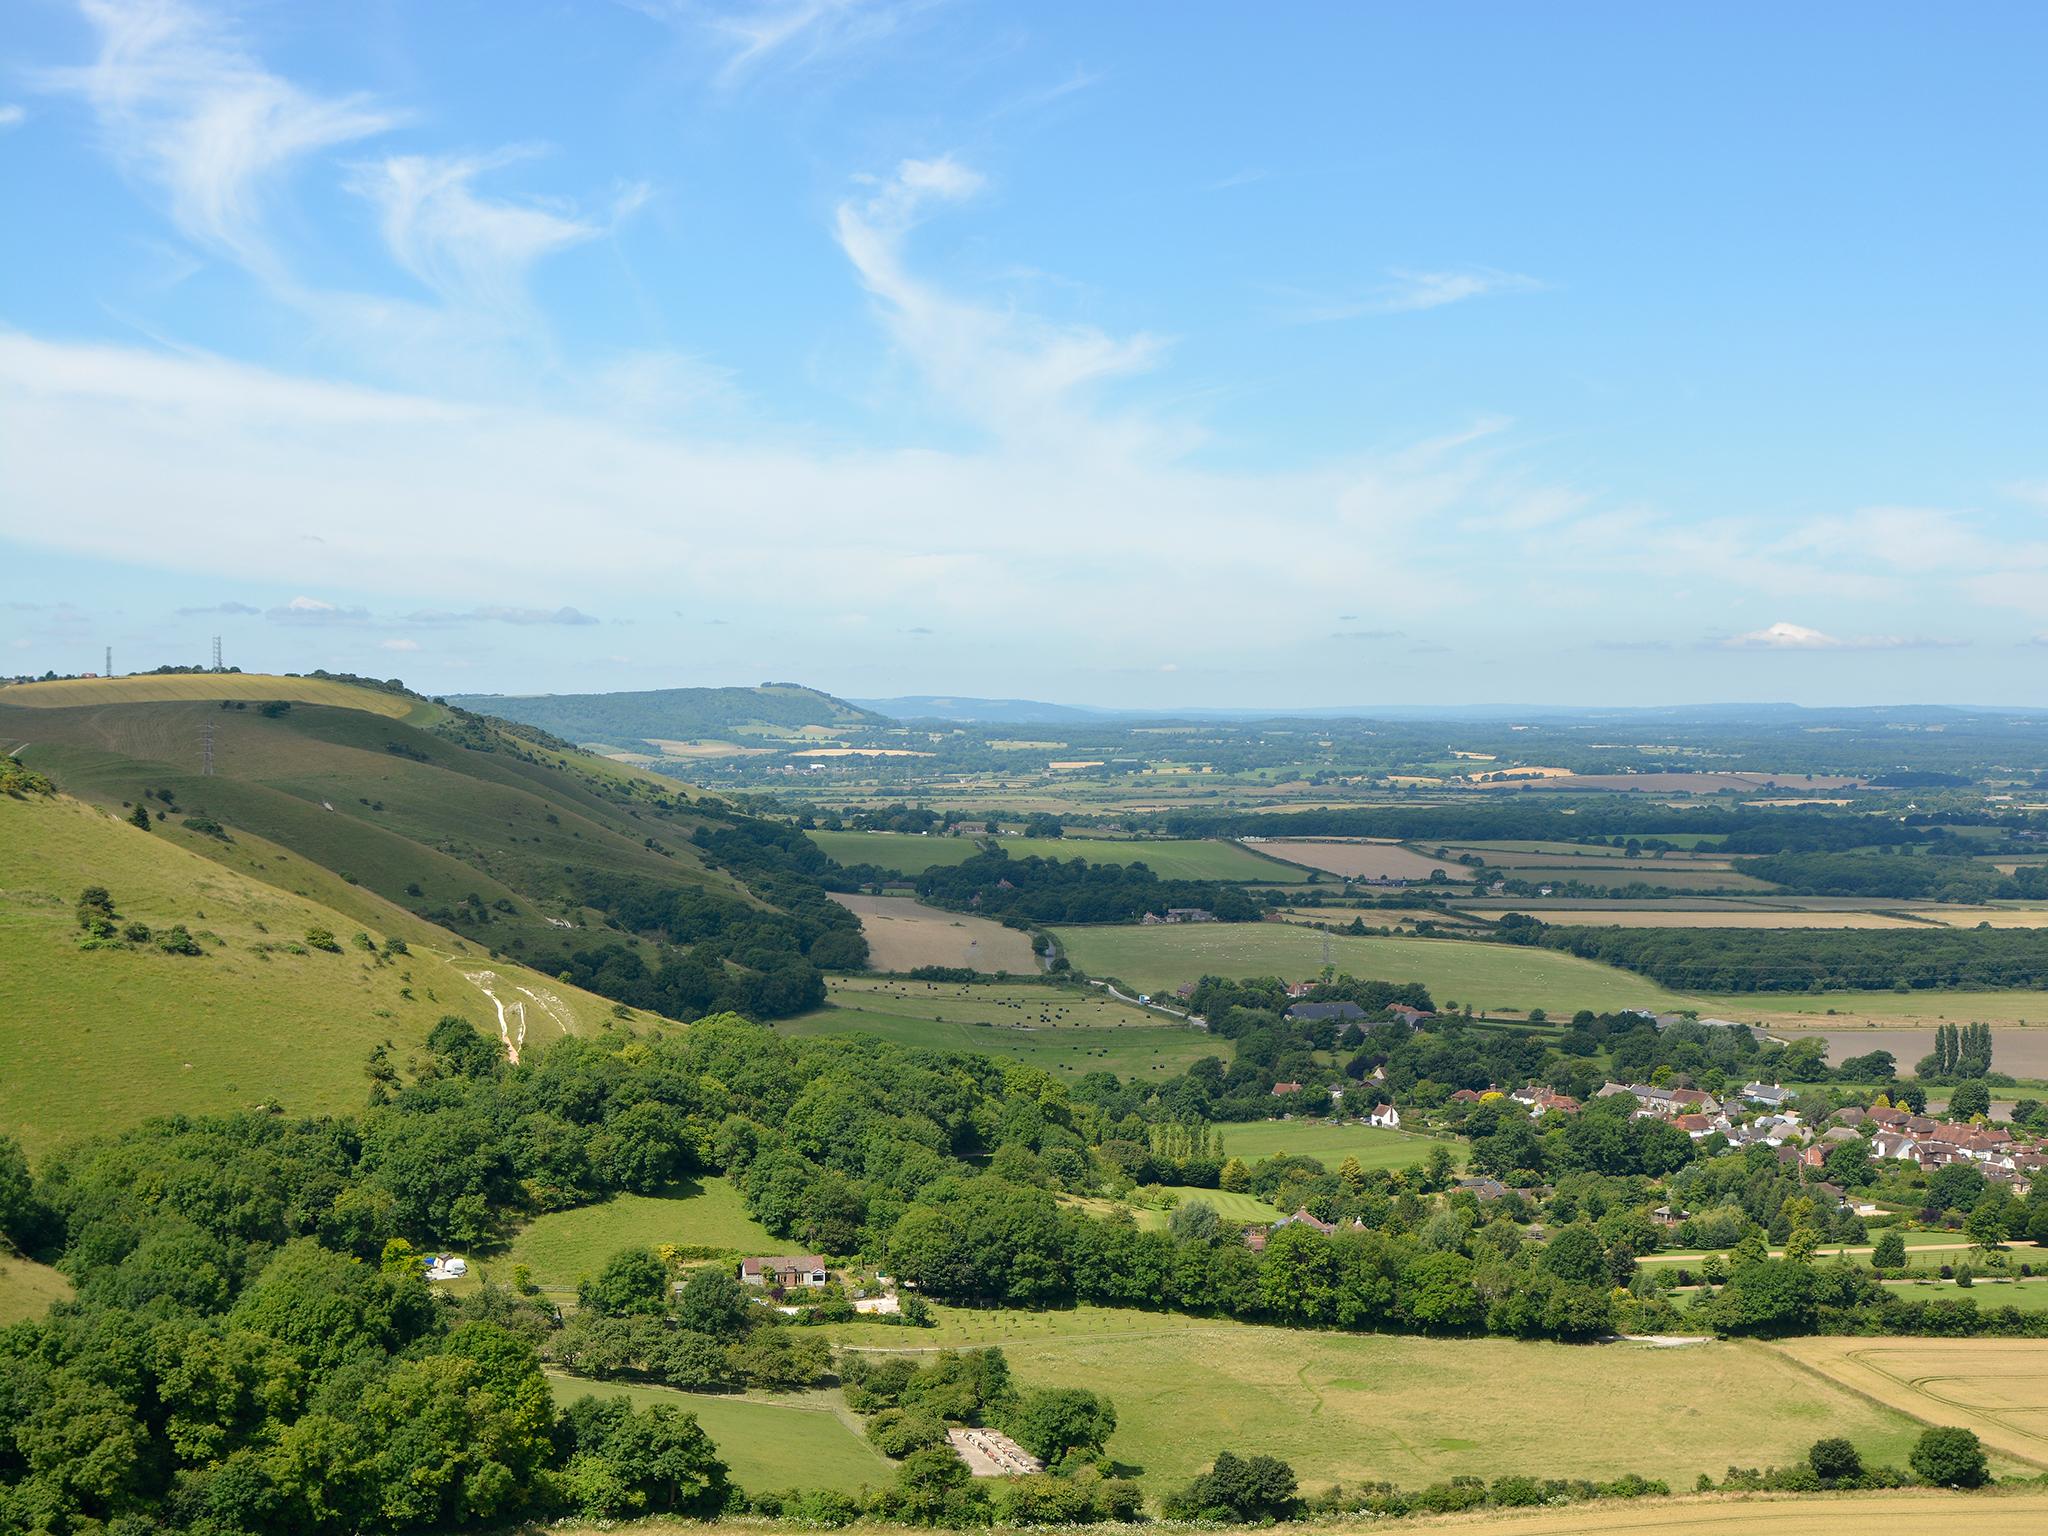 Devil's Dyke: there's more to Brighton than beaches